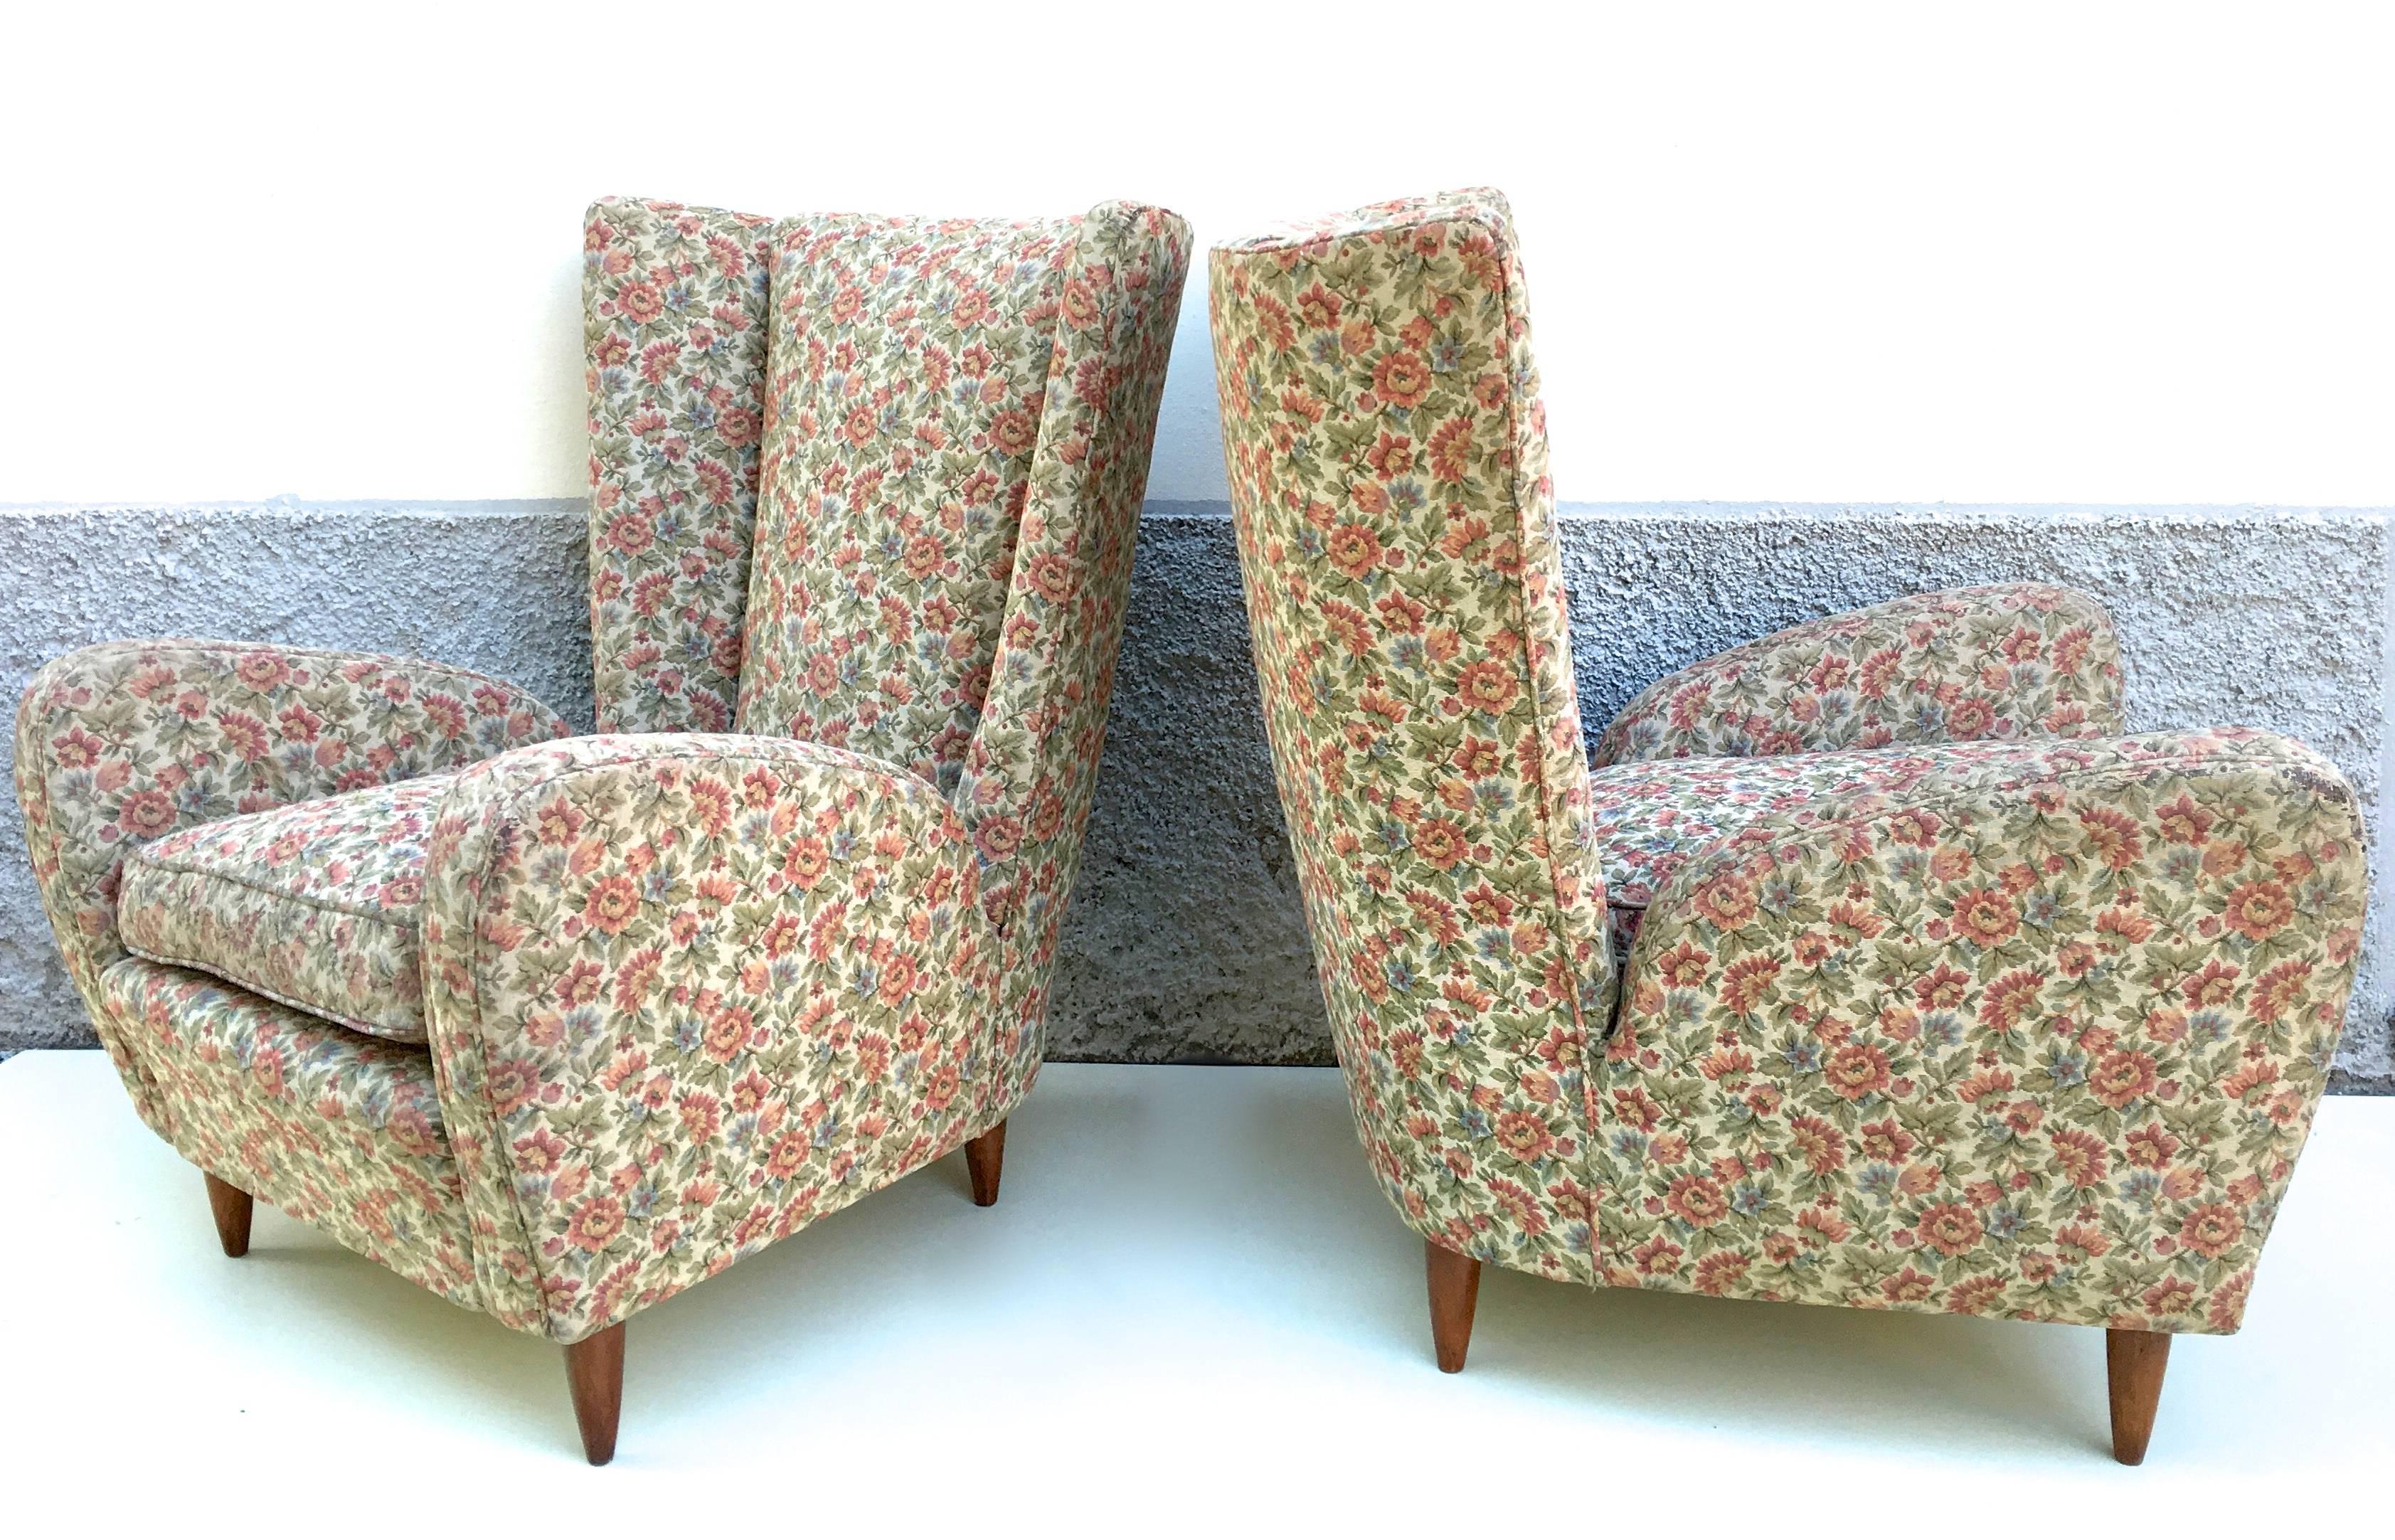 A pair of Italian lounge chairs by the Milanese architect Paolo Buffa. Designed for the Hotel Bristol in Merano, circa 1950.
Original fabric in flower pattern and padding. Walnut tapered feet.